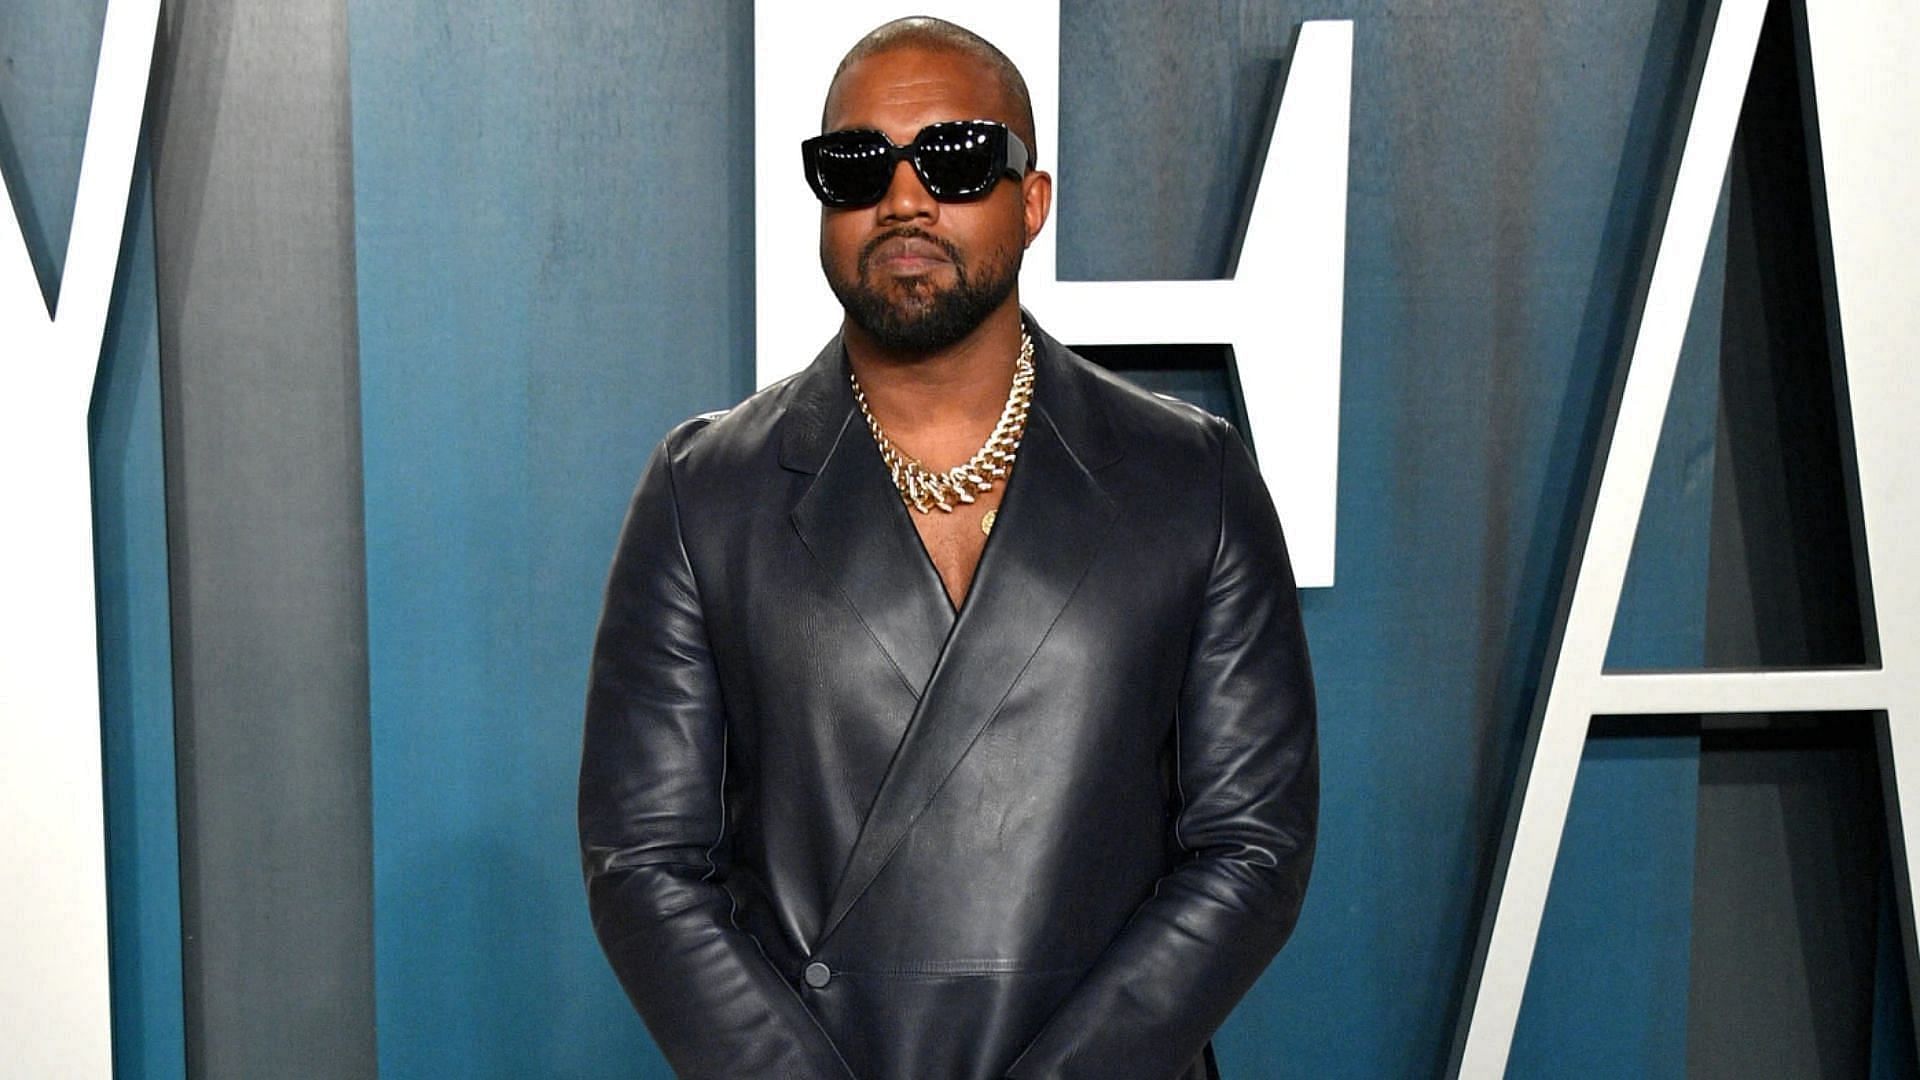 Kanye West goes viral for having &quot;demon kneecaps&quot; (Image via Getty Images)